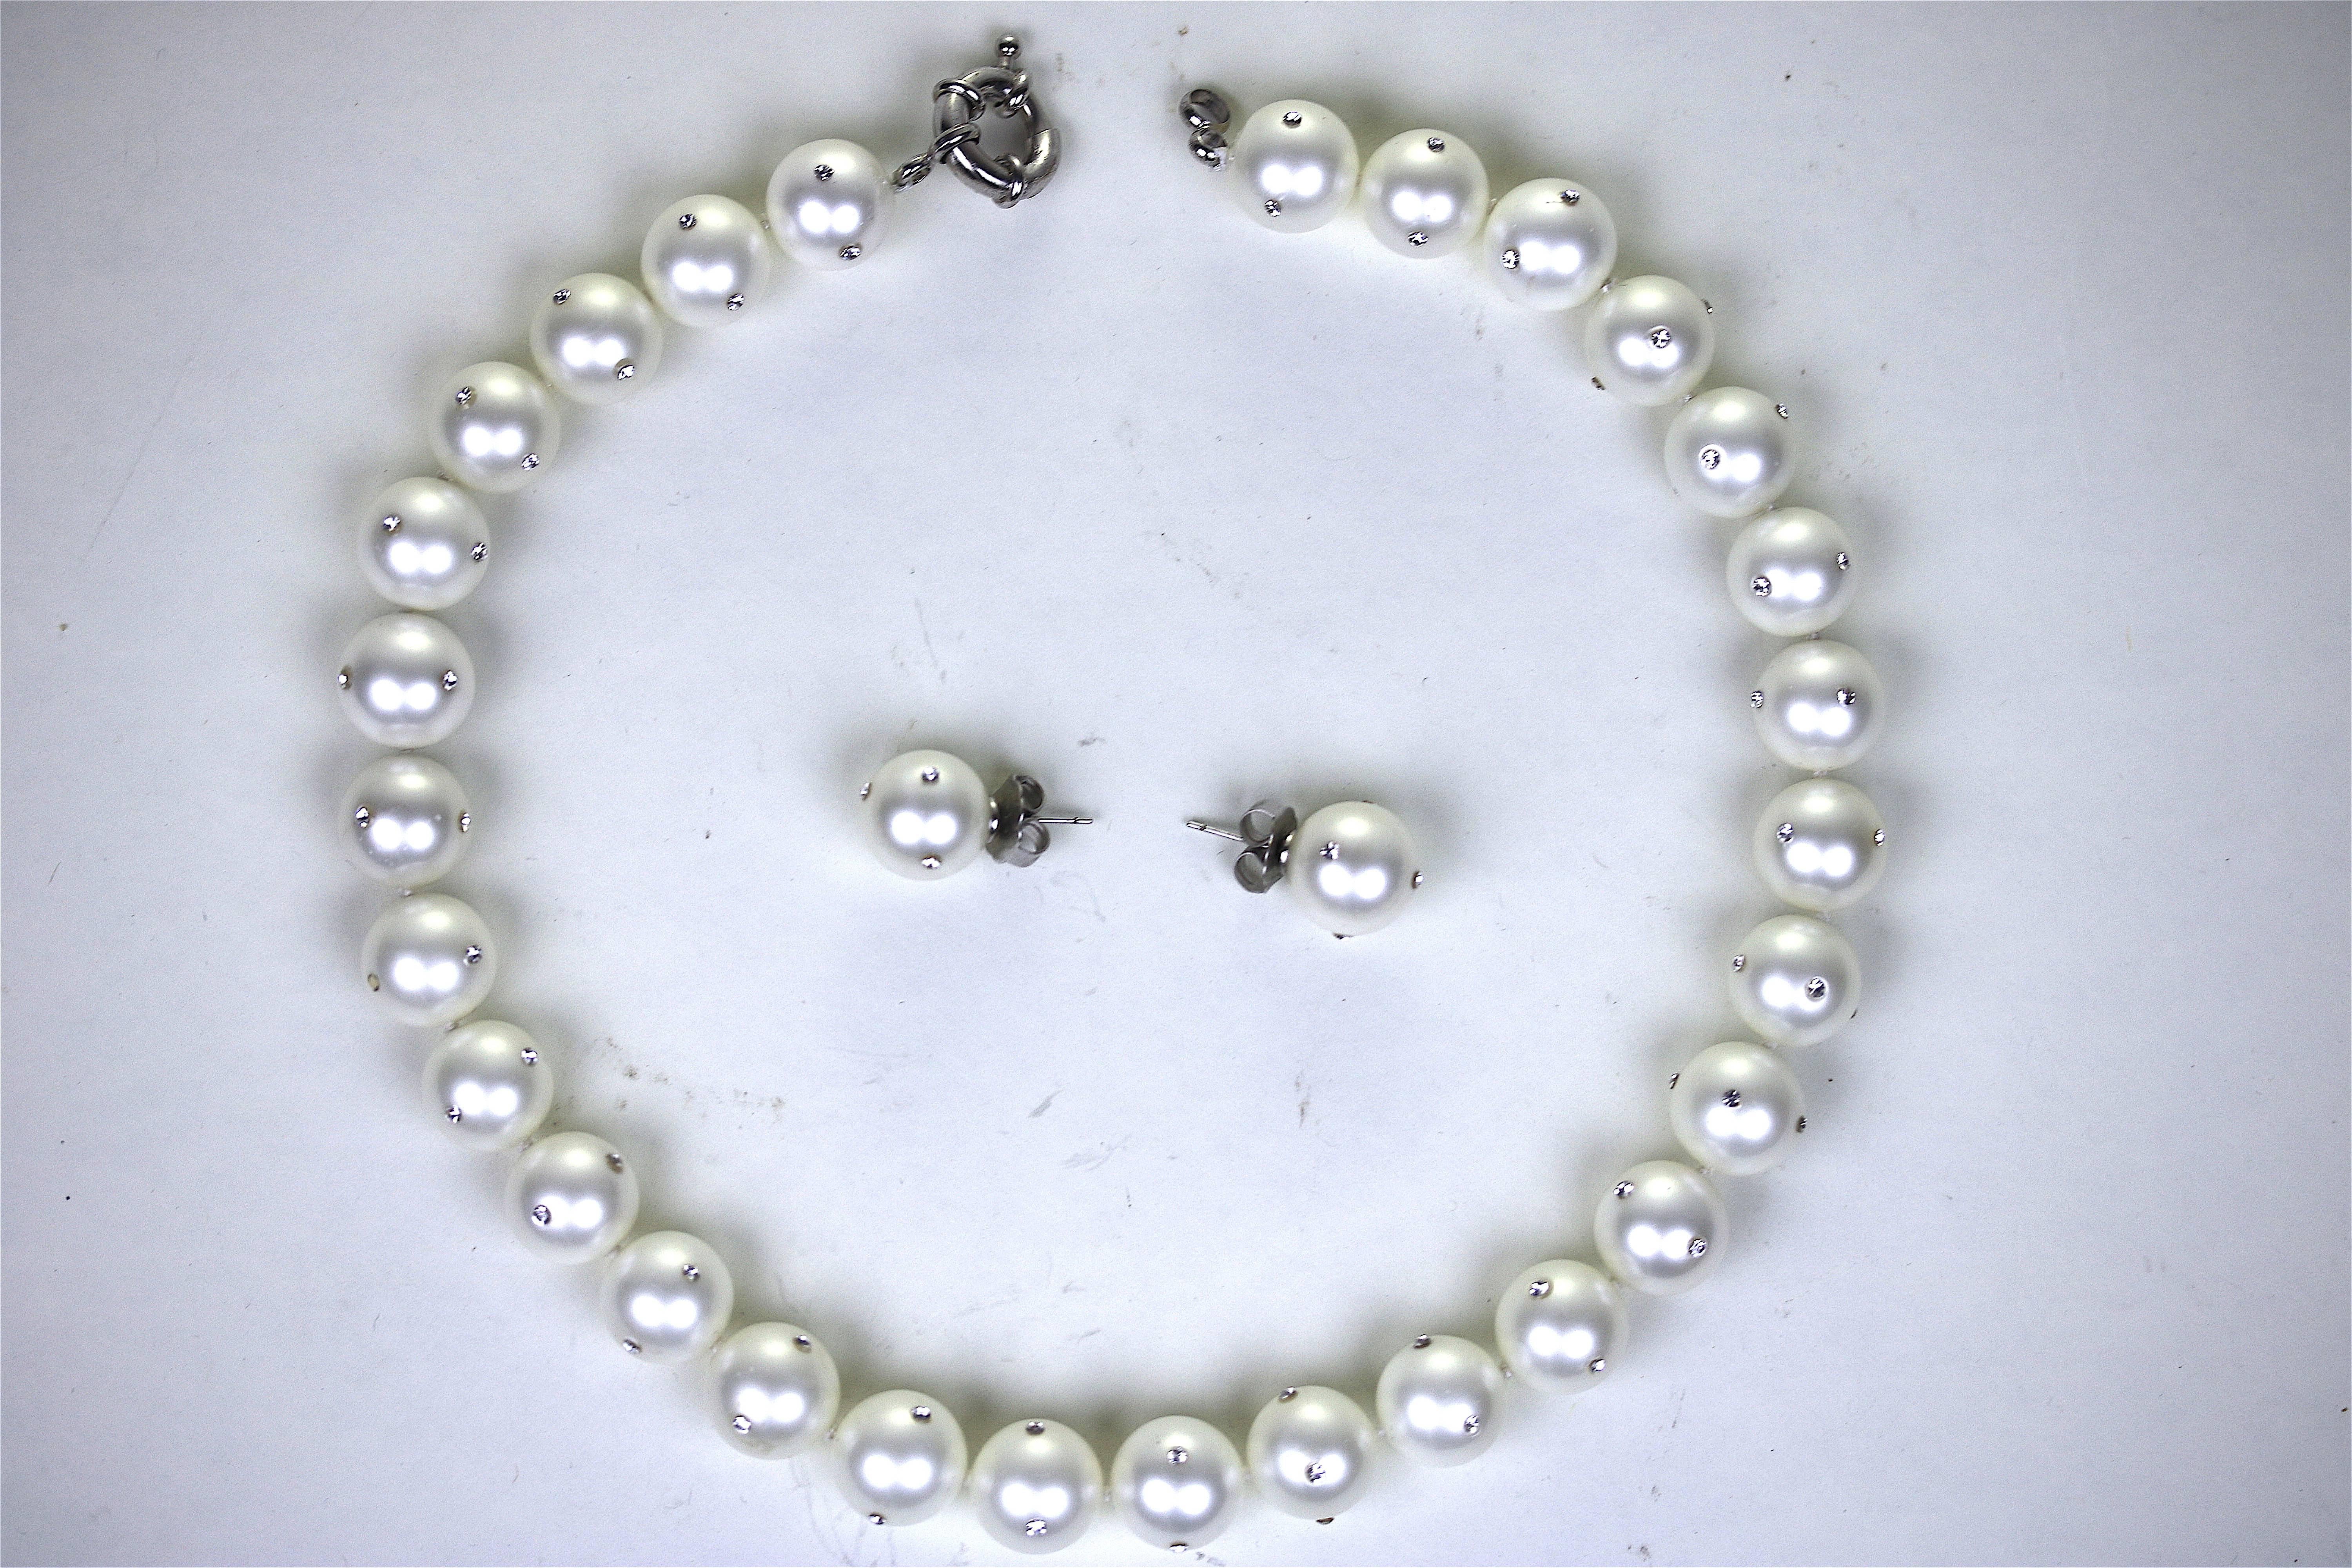 A Gorgeous unique 14-16 mm faux pearl (29 pearls on necklace) with inlay all-around of sparkly cz diamond inlay, spaced around each pearl both the necklace, with silver spring ring clasp and matching pair of pierced pearl earrings with silver post.